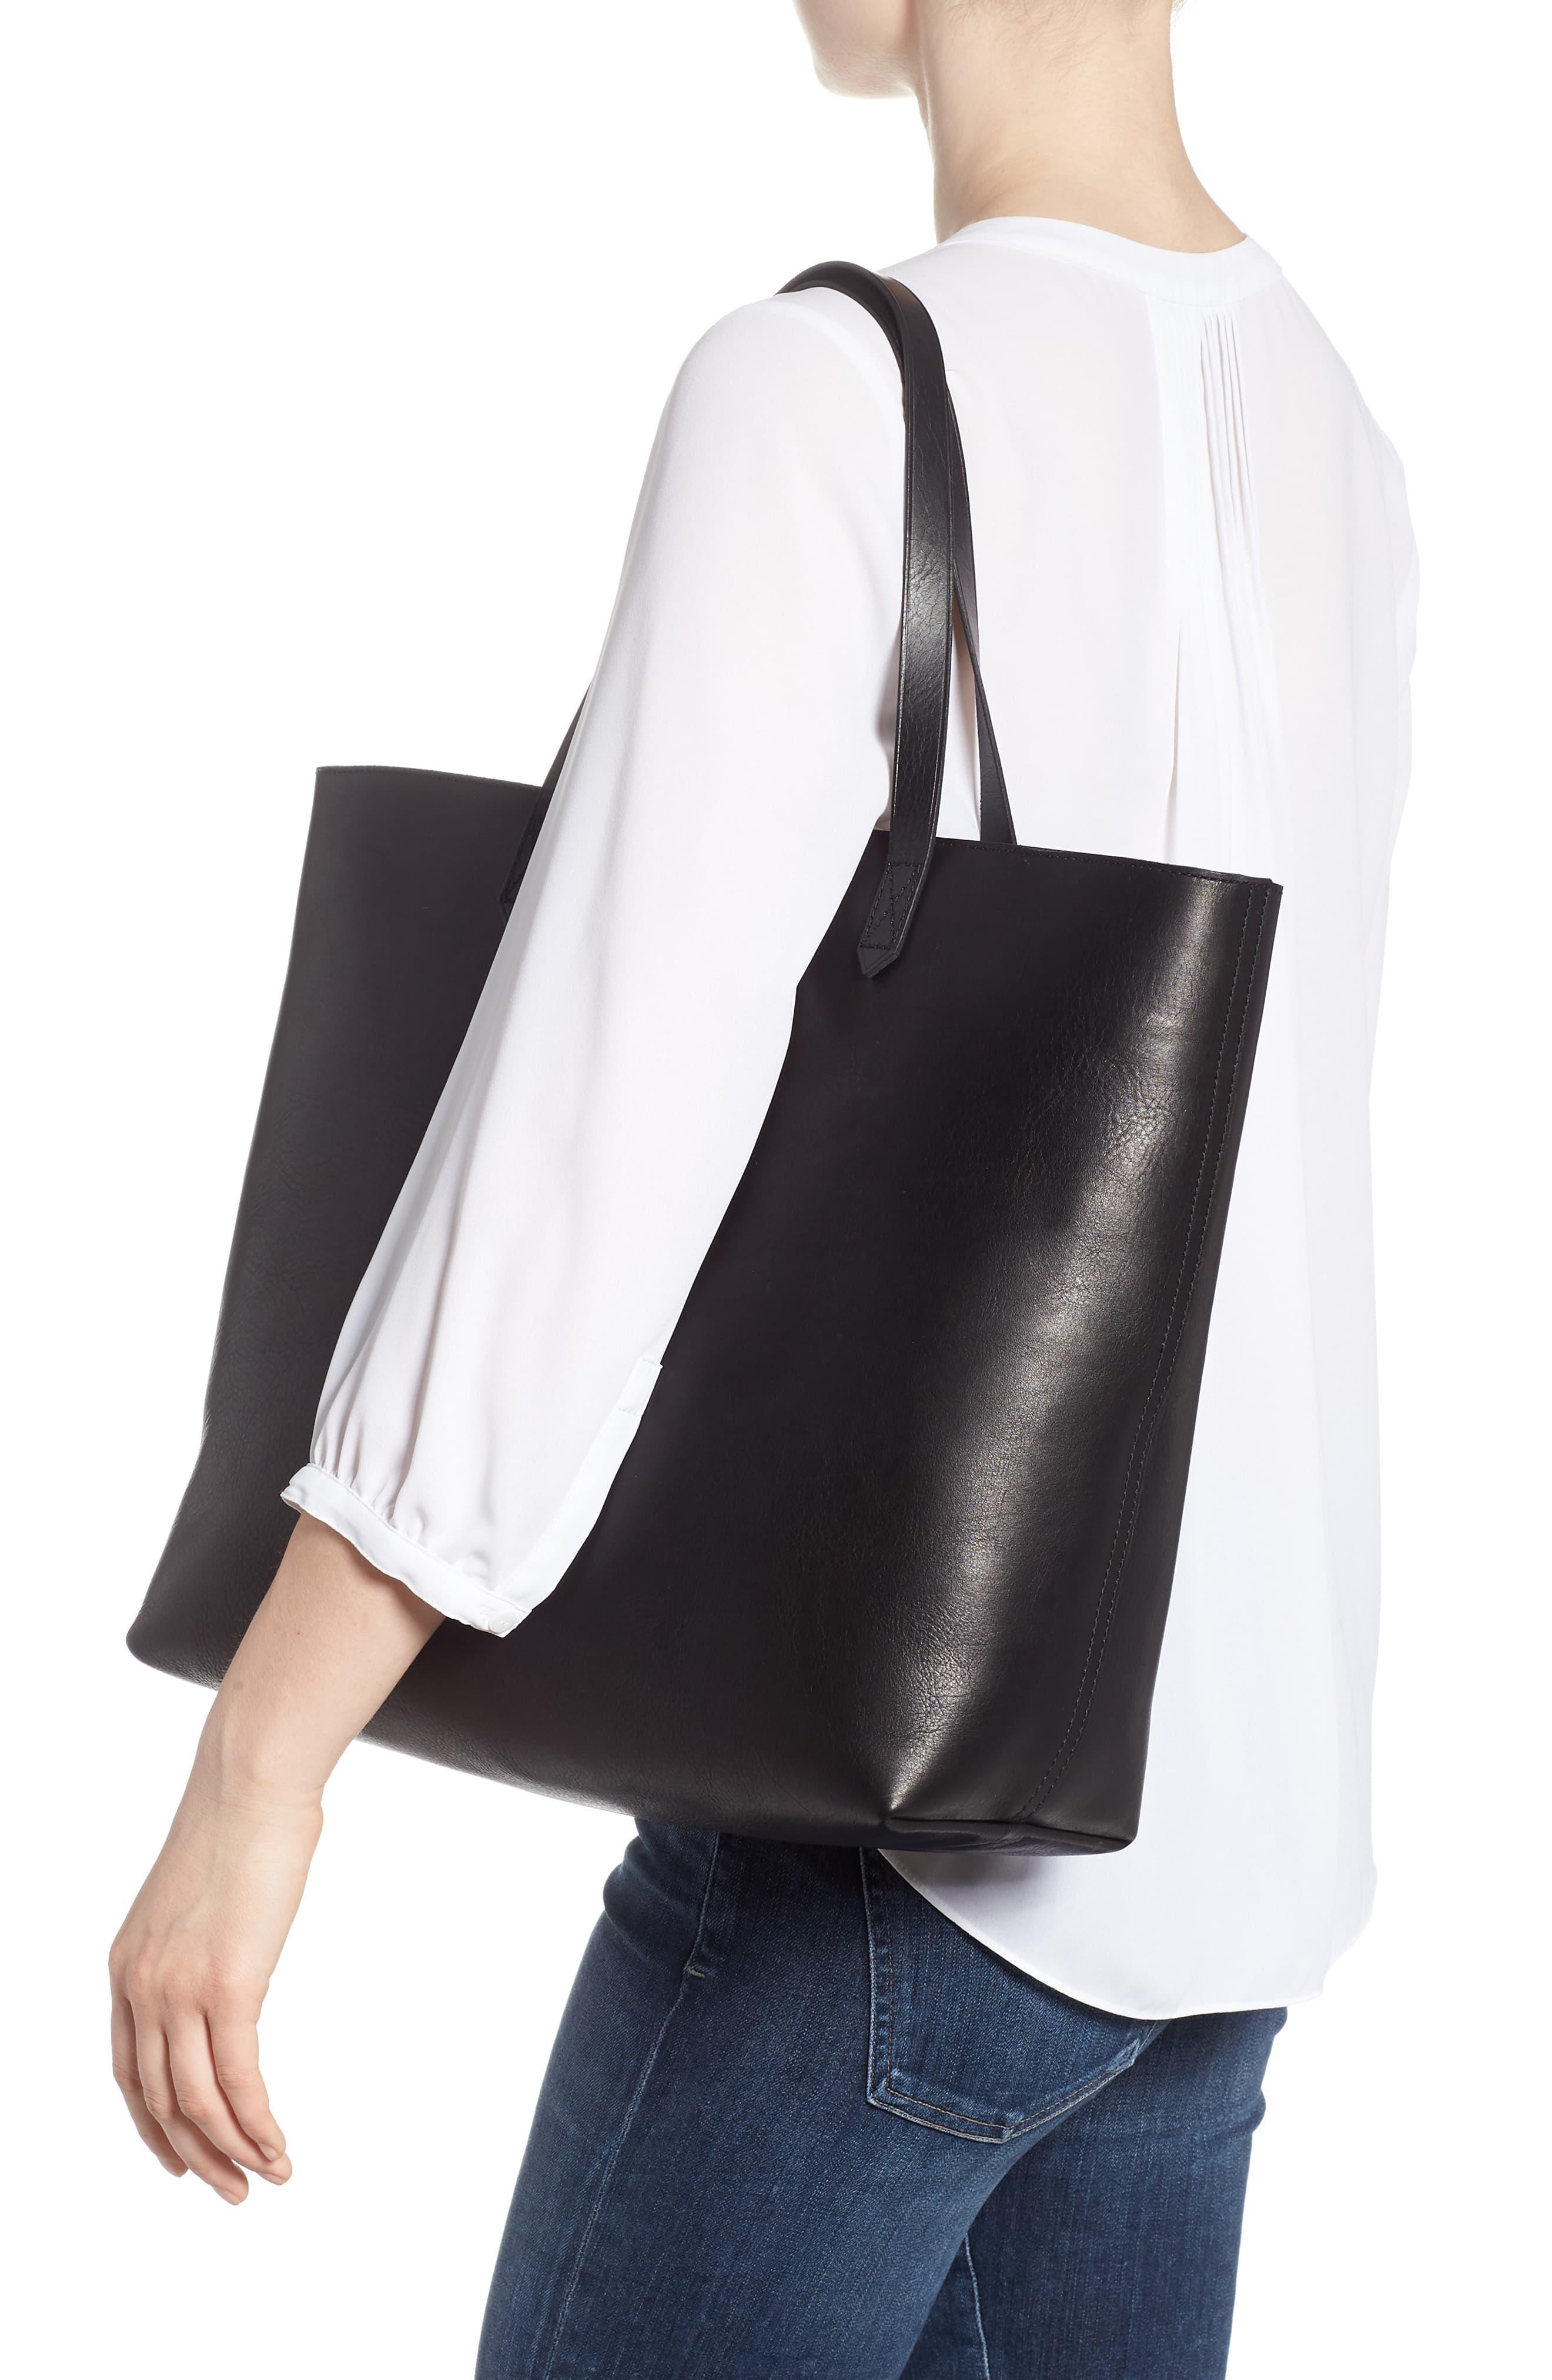 Madewell Zip Top Transport Leather Tote in Black - Lyst